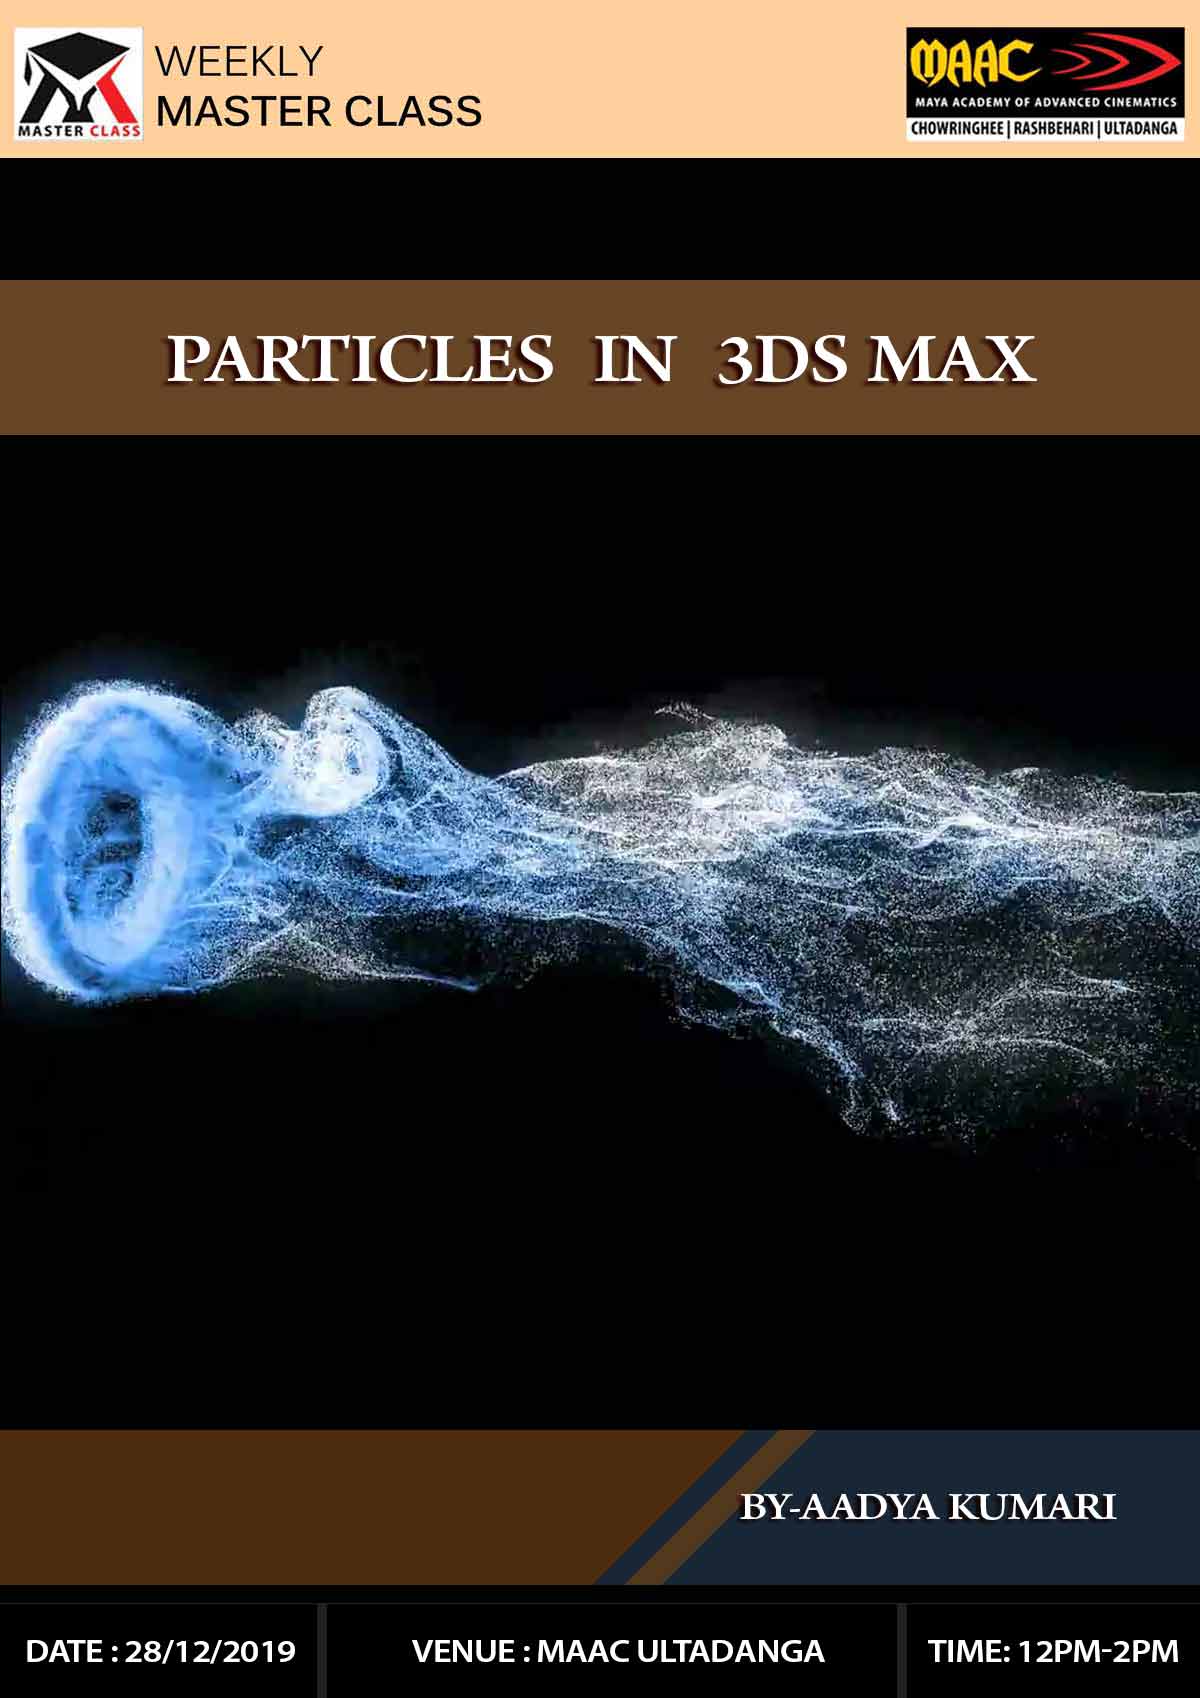 Weekly Master Class on Particles In 3Ds Max